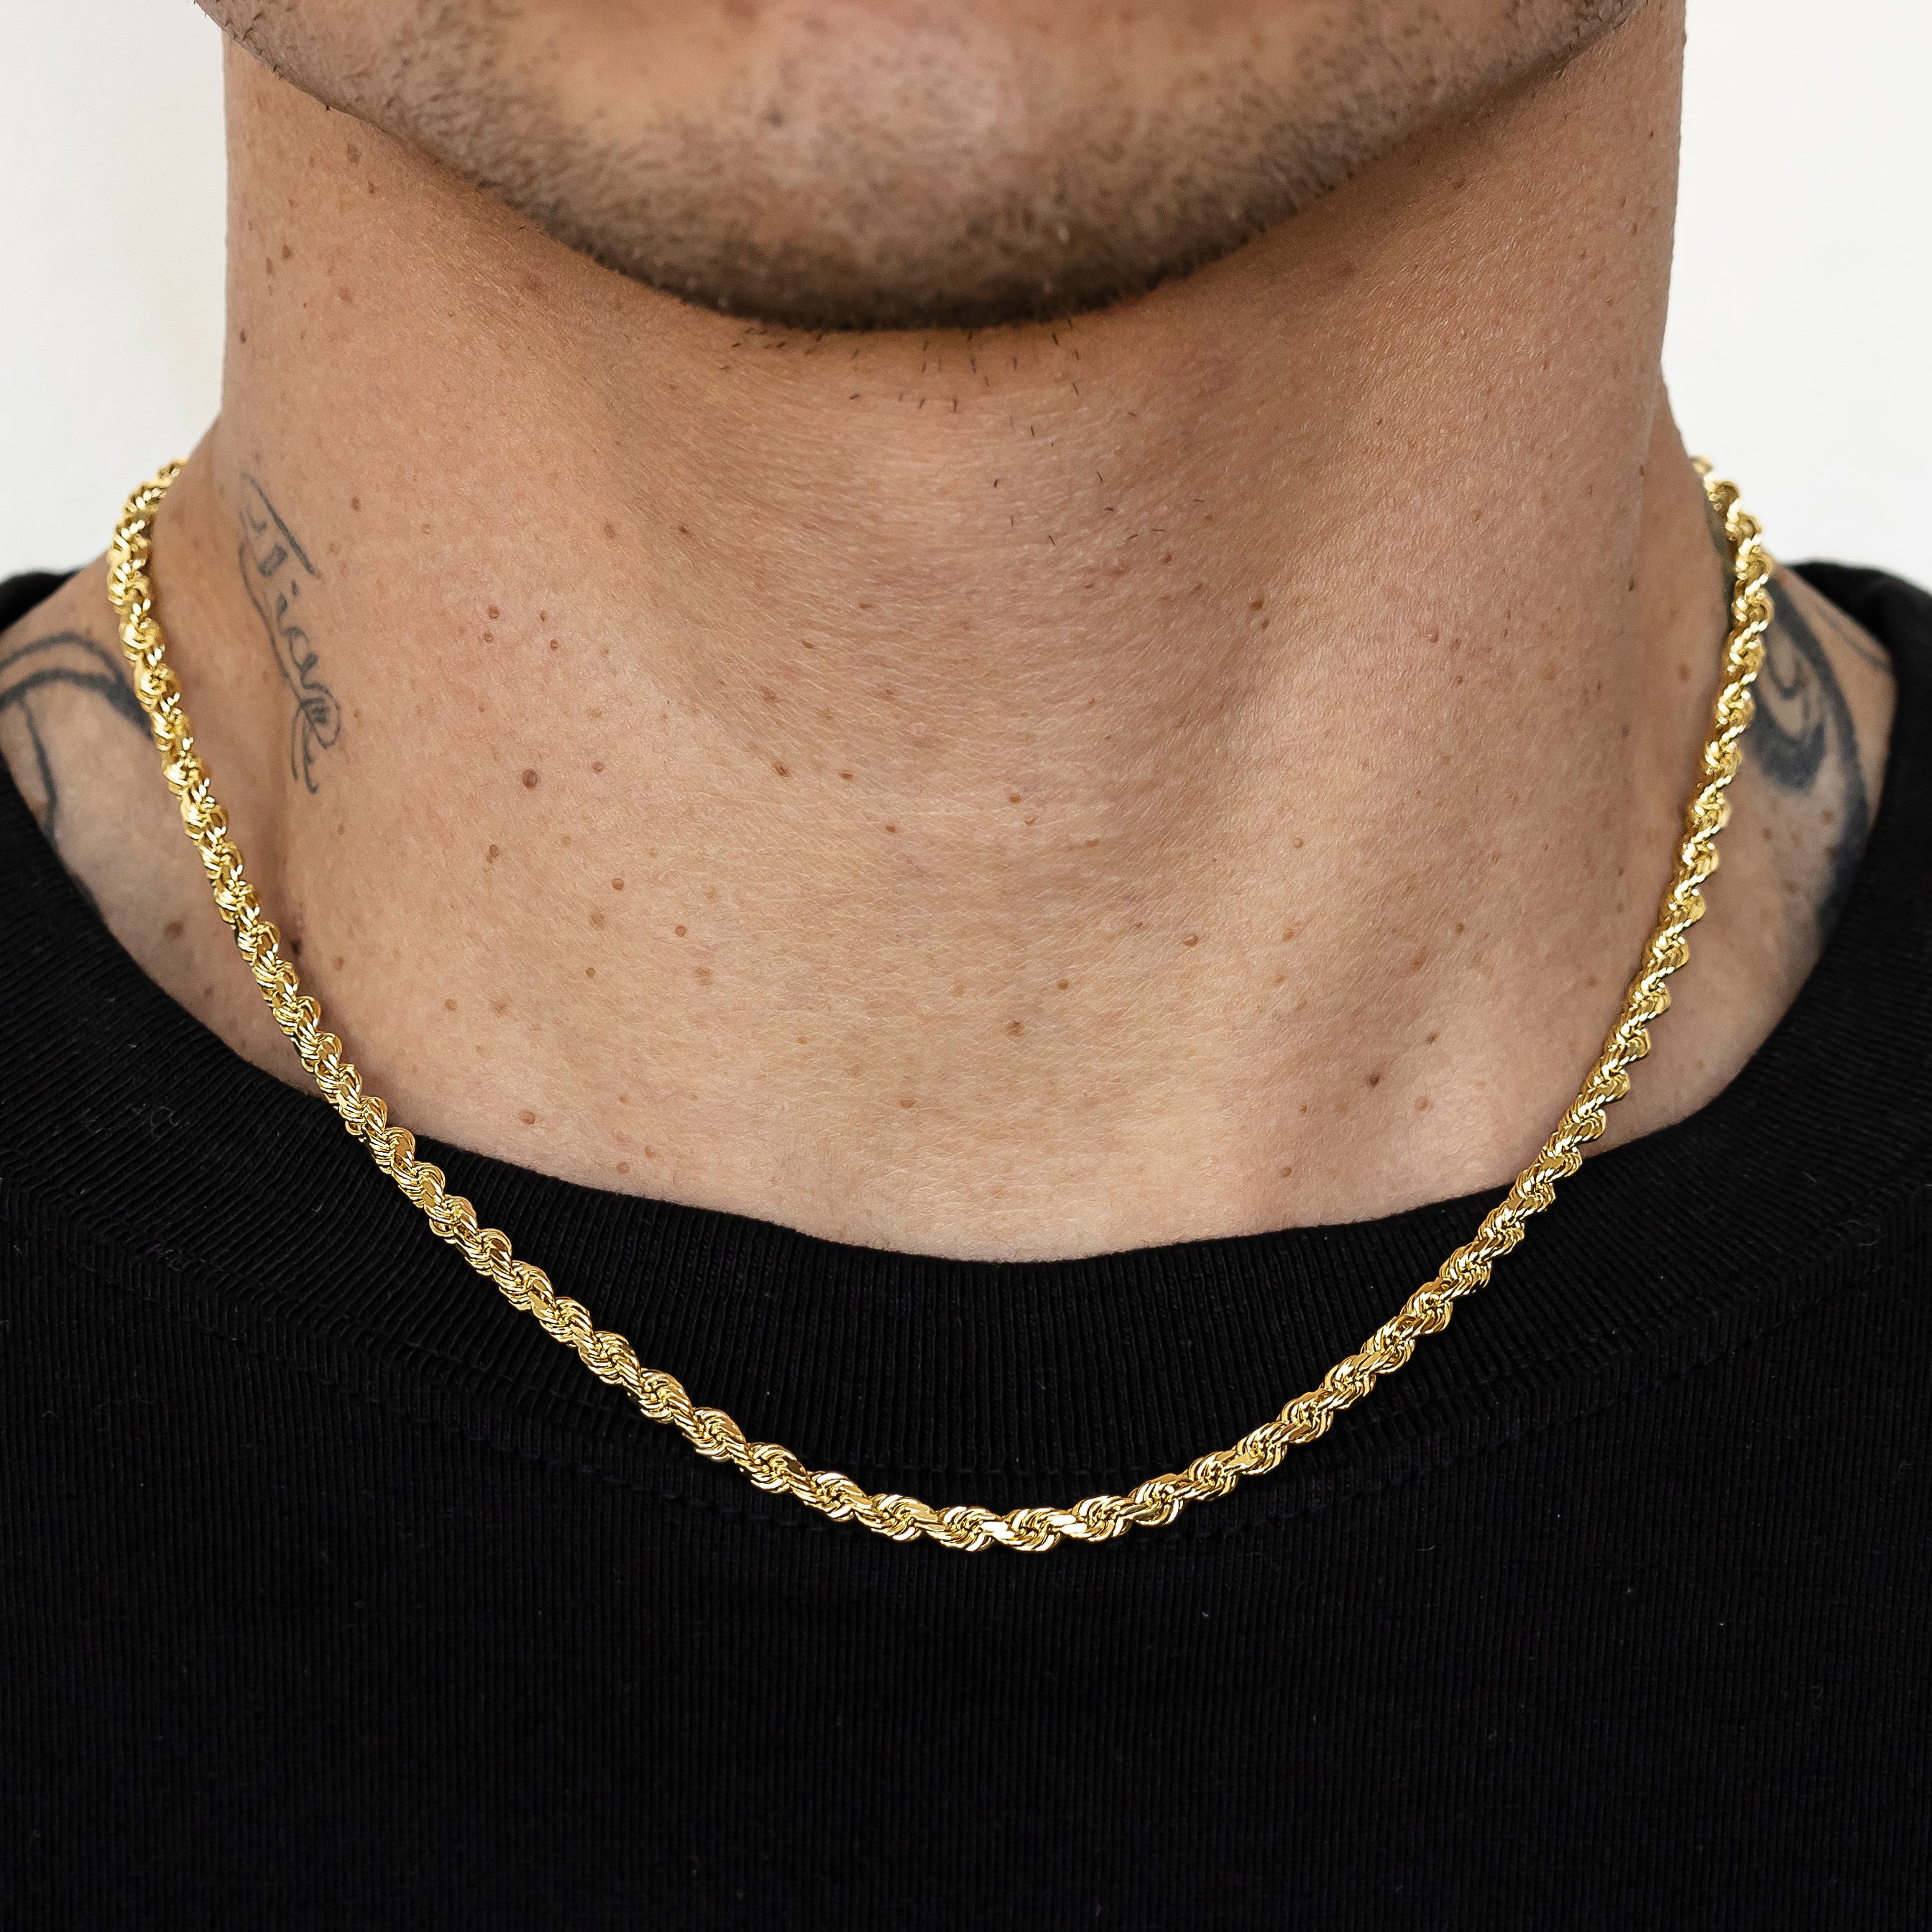 10k Yellow Gold Solid Diamond Cut Rope Chain